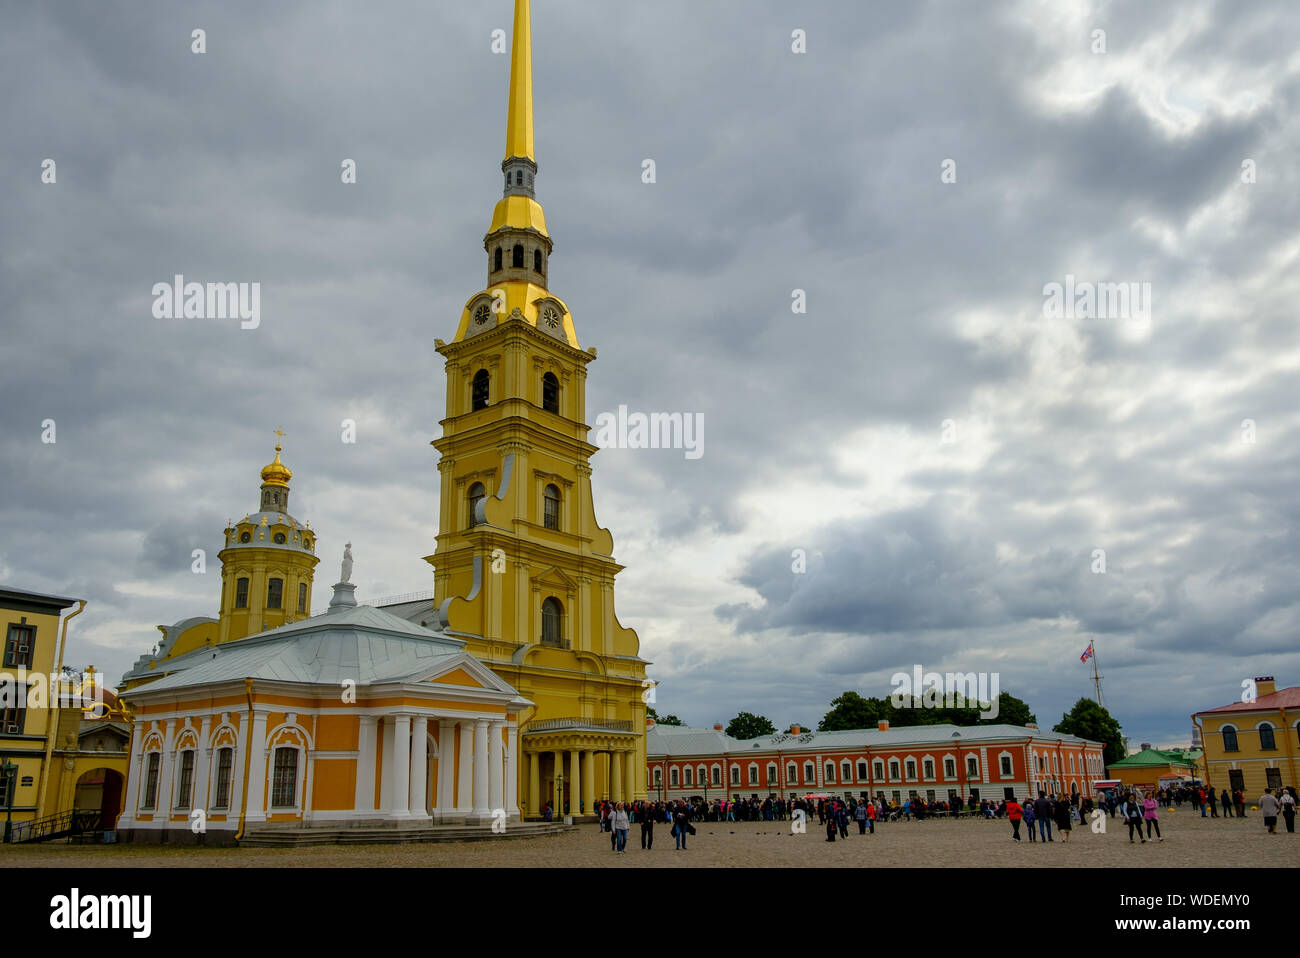 ST. PETERSBURG,  RUSSIA - AUGUST 4, 2019: The Peter and Paul Cathedral is a Russian Orthodox cathedral located inside the Peter and Paul Fortress. It Stock Photo